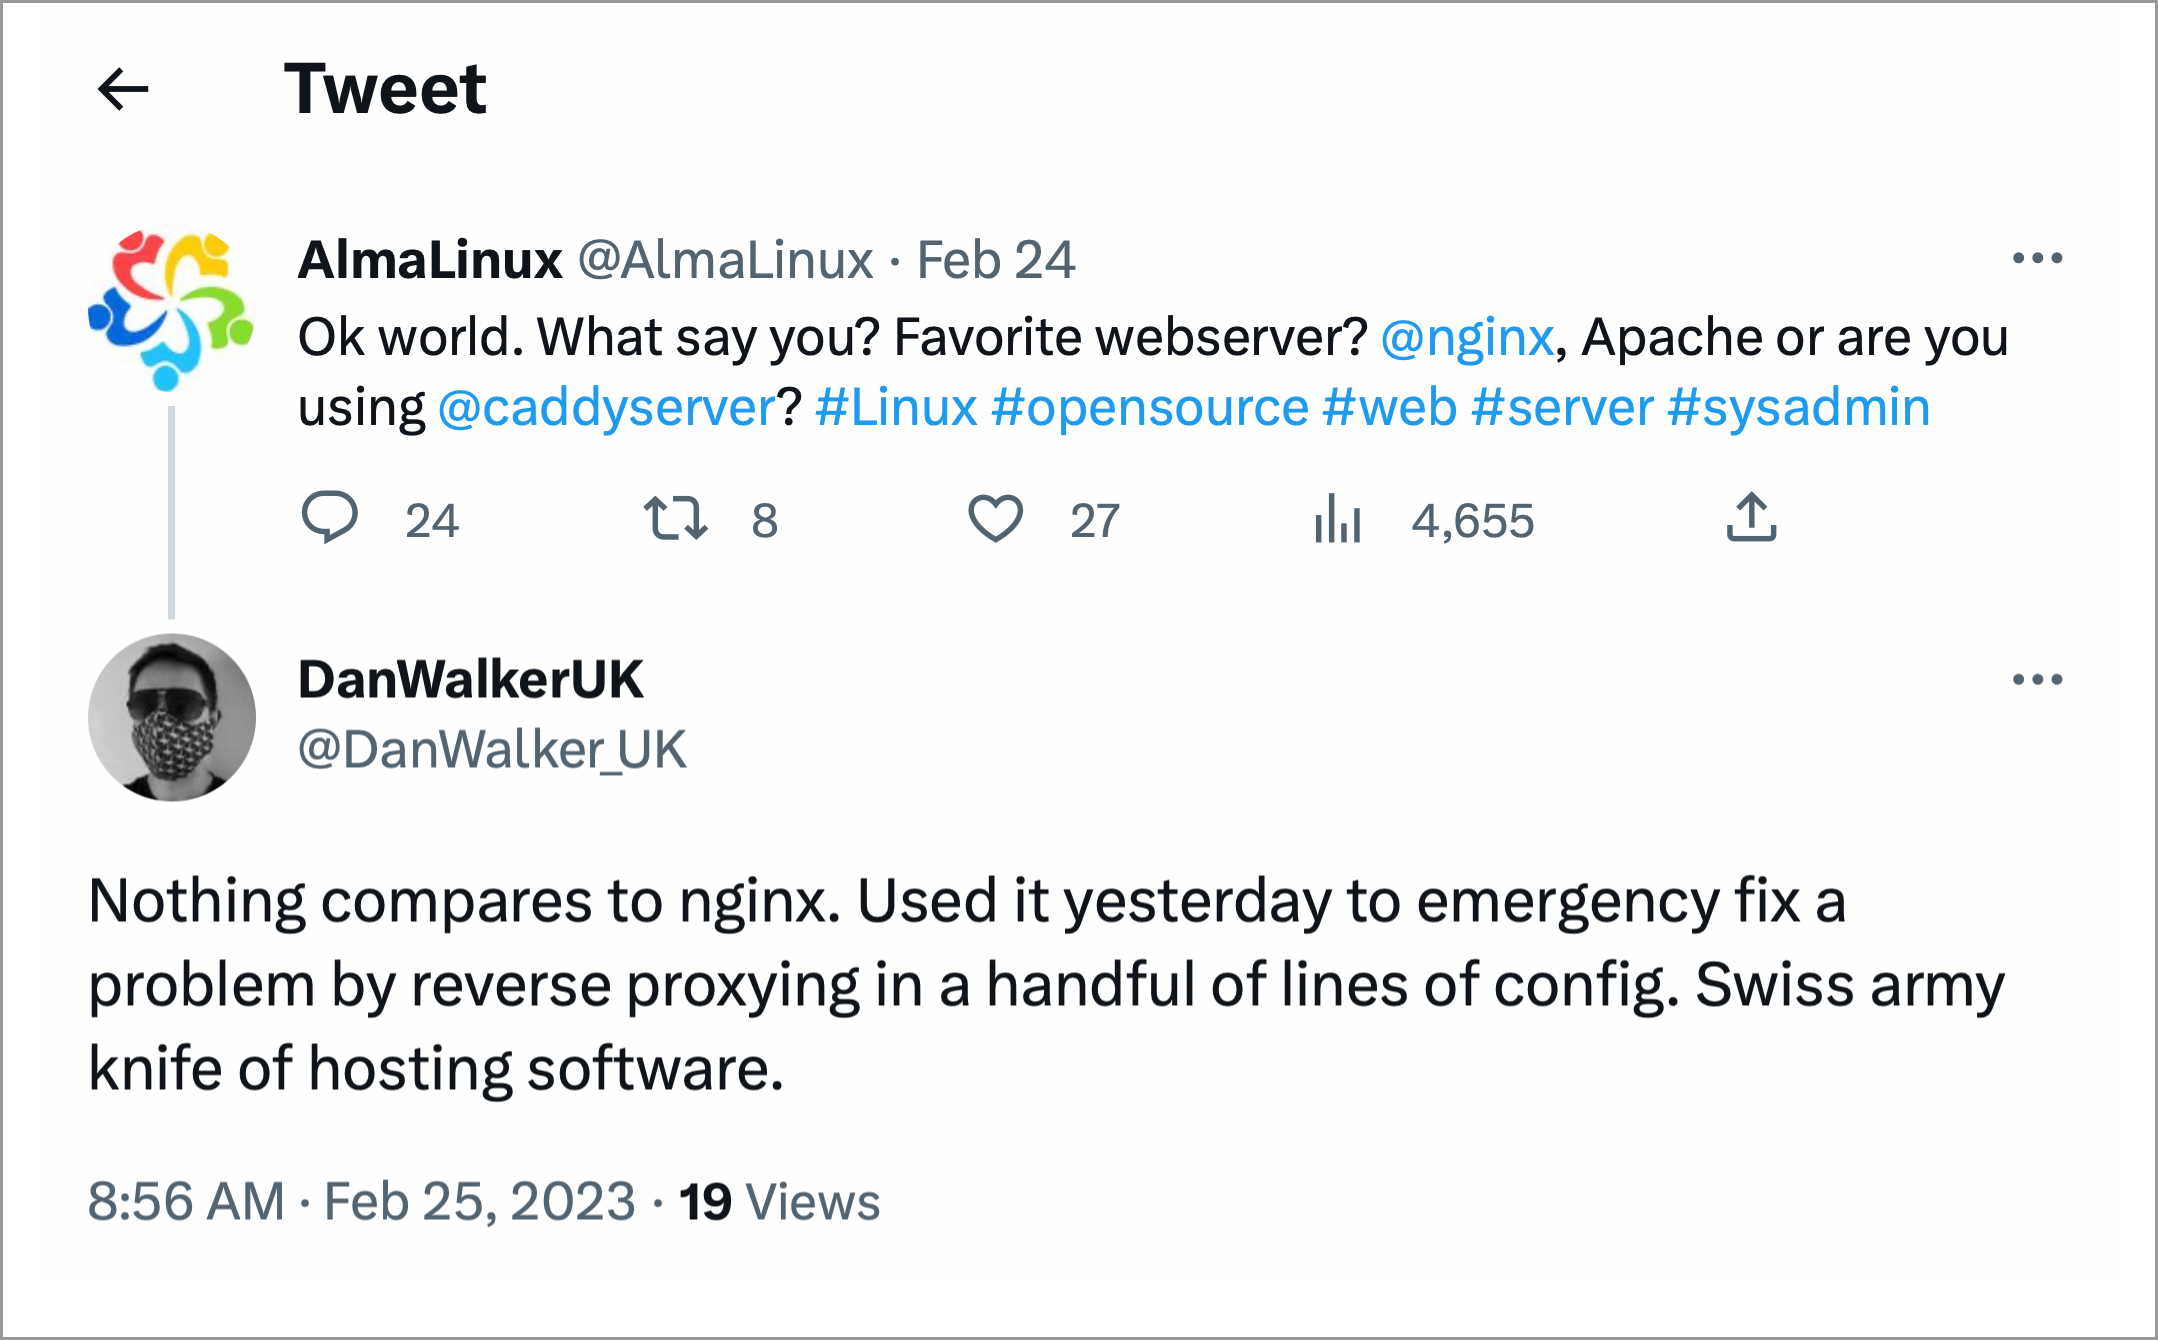 Tweet screenshot: "Ok world. What say you? Favorite webserver? @nginx , Apache or are you using @caddyserver ?" and the response "Nothing compares to nginx. Used it yesterday to emergency fix a problem by reverse proxying in a handful of lines of config. Swiss army knife of hosting software."